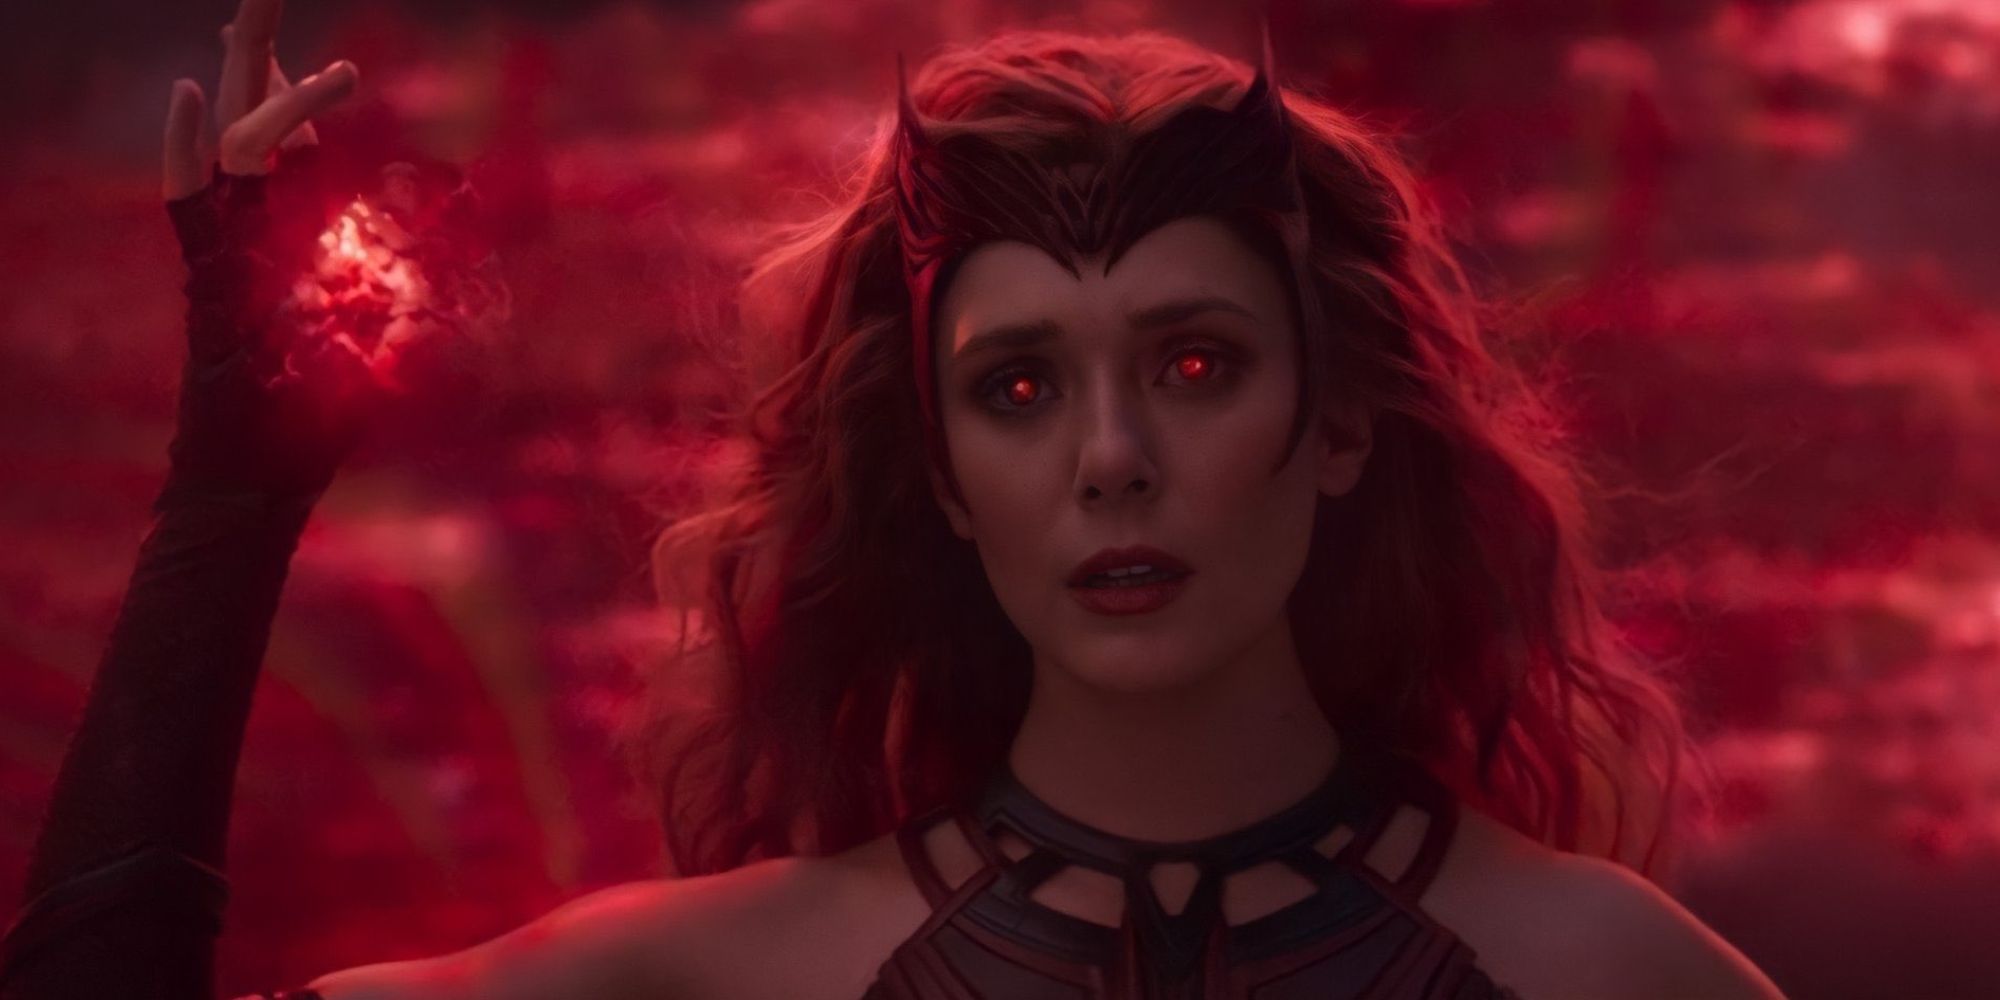 Elizabeth Olsen as Wanda Maximoff as she becomes the Scarlet Witch in the Disney+ series WandaVision